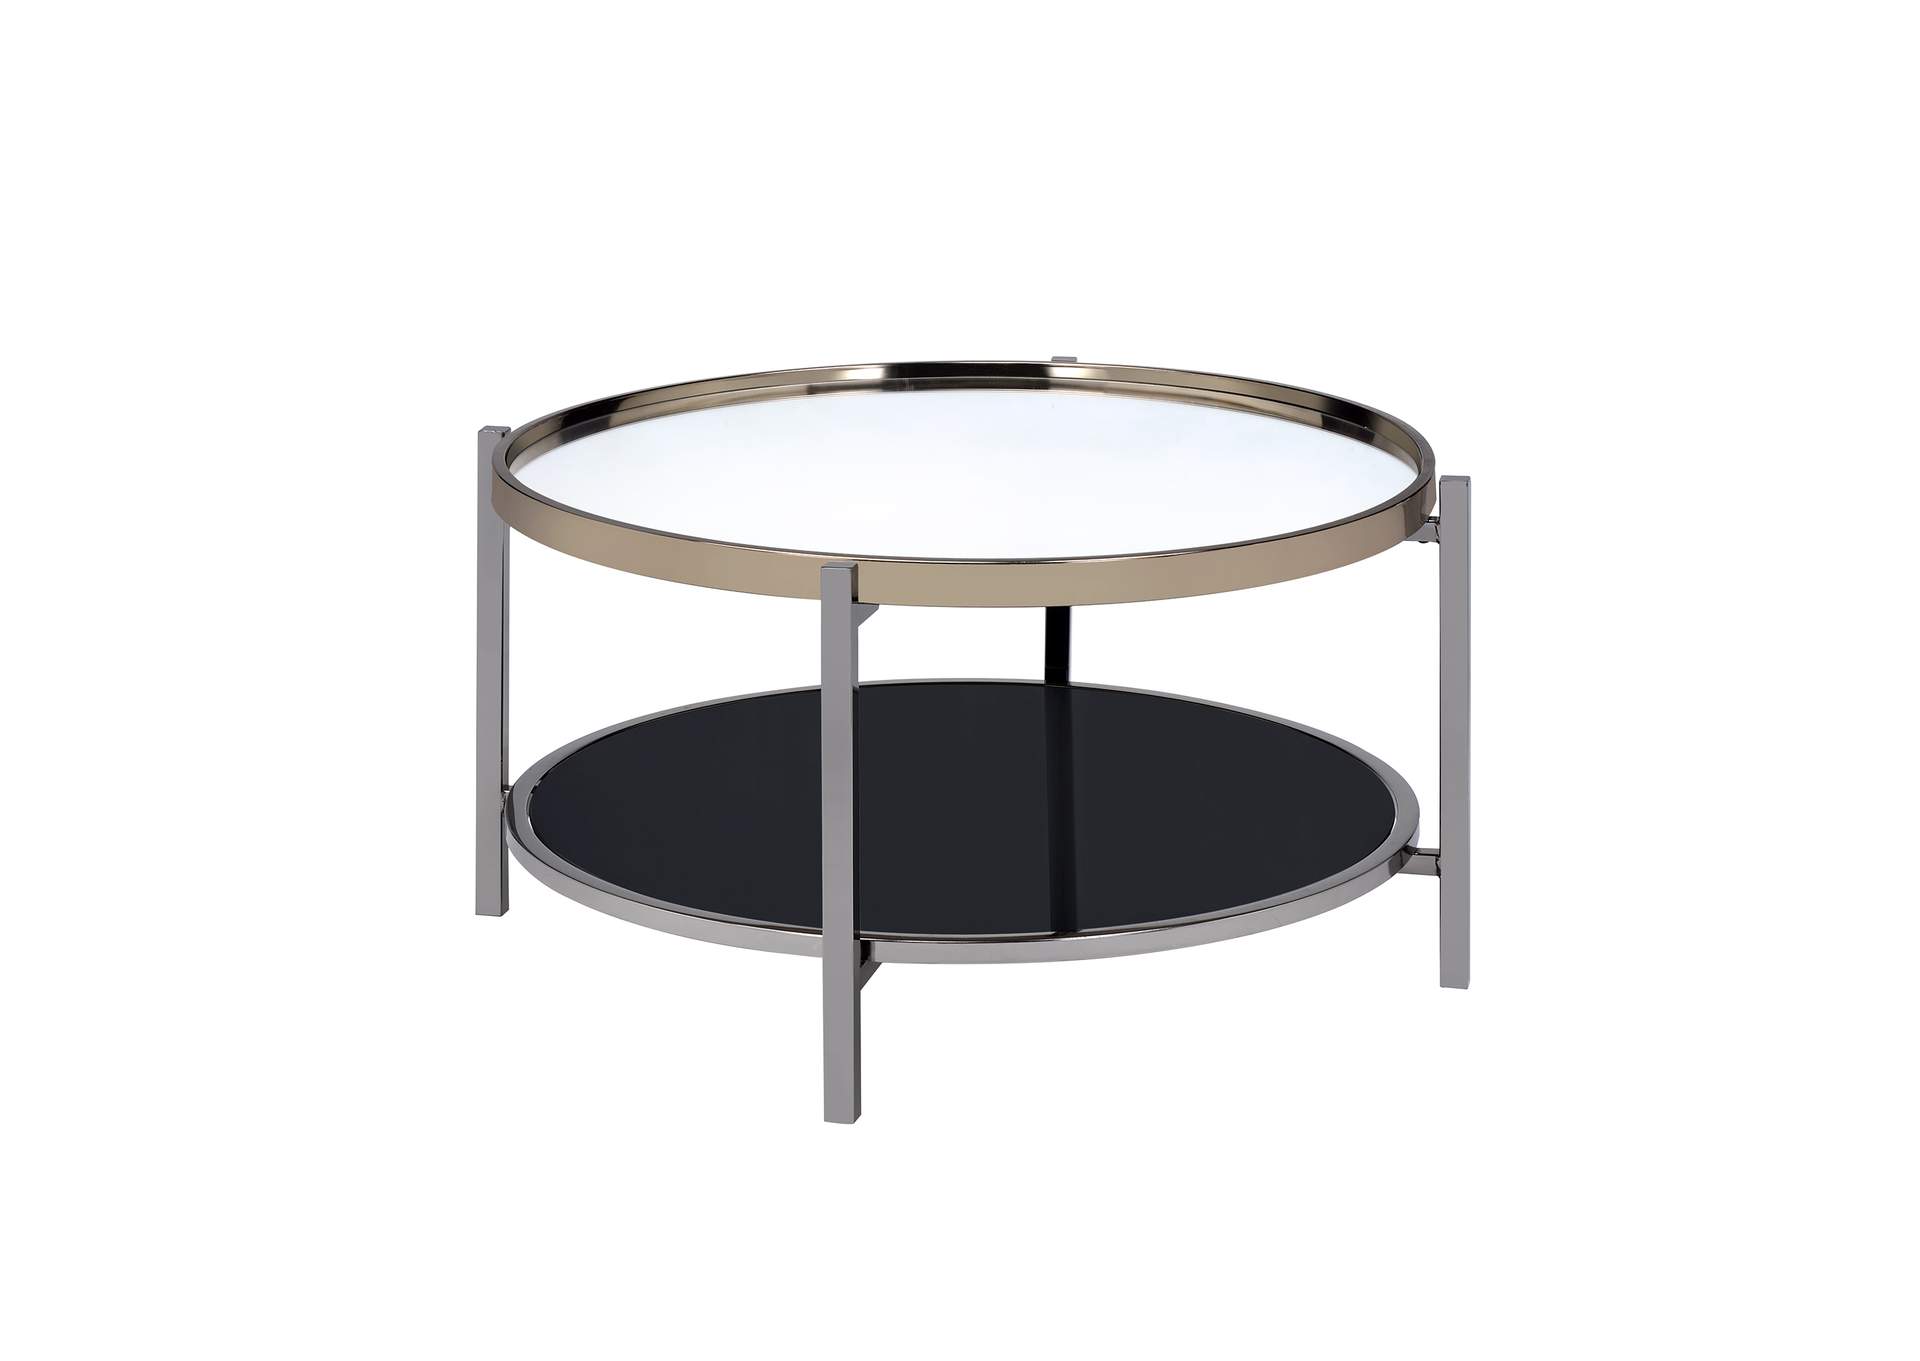 Edith C - 1112 Coffee Table,Elements